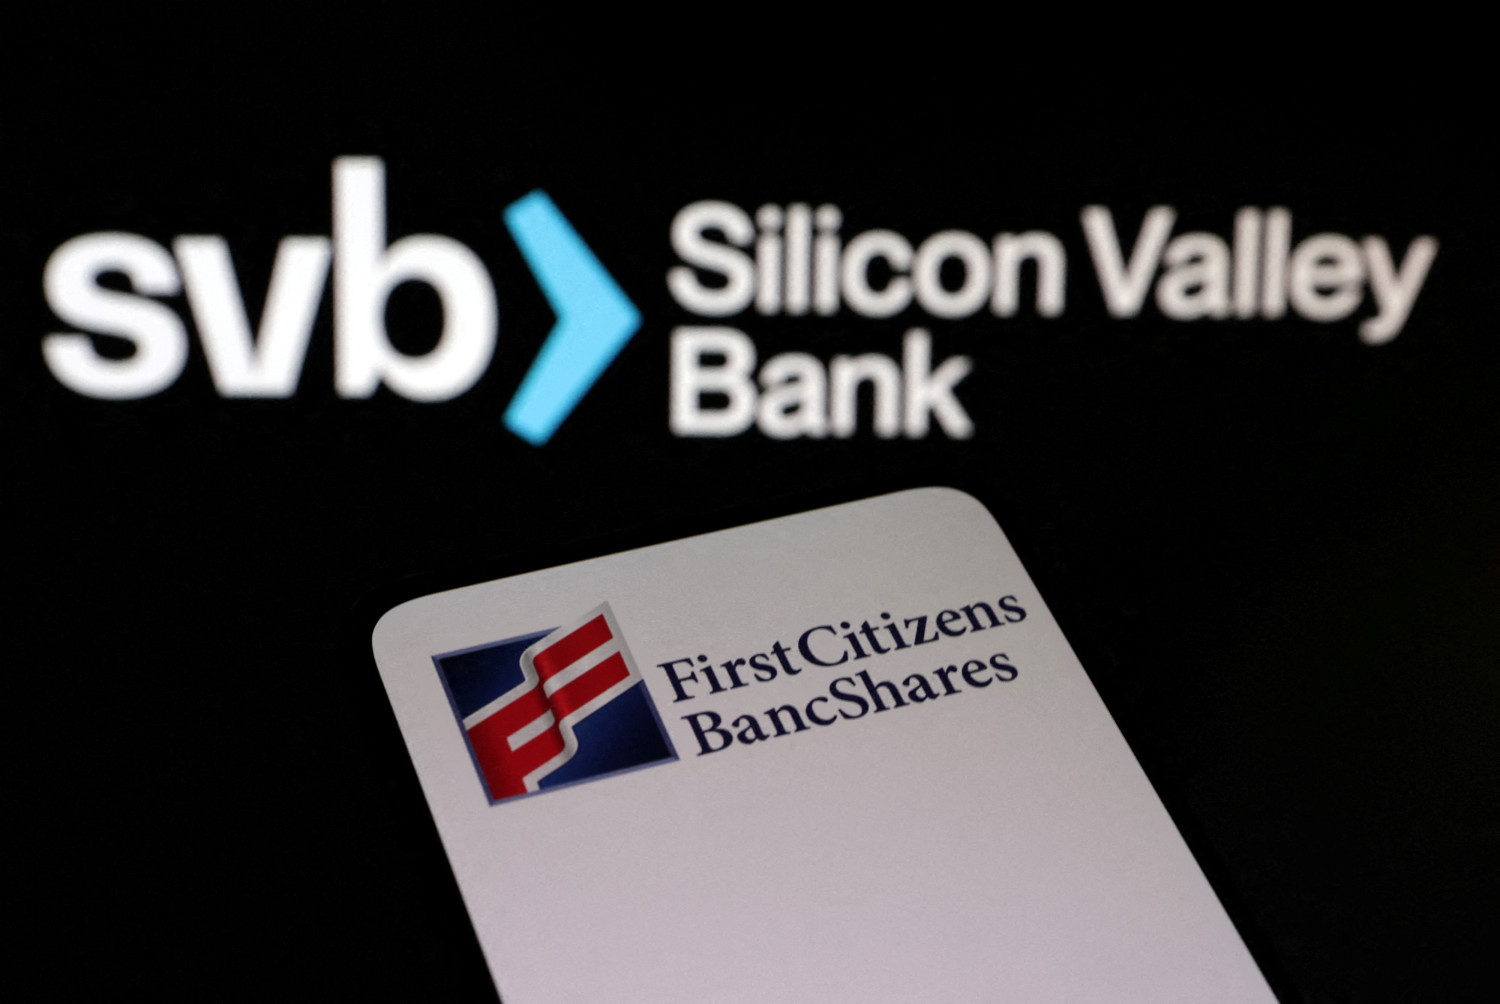 svb silicon valley bank first citizens crise bancaire 